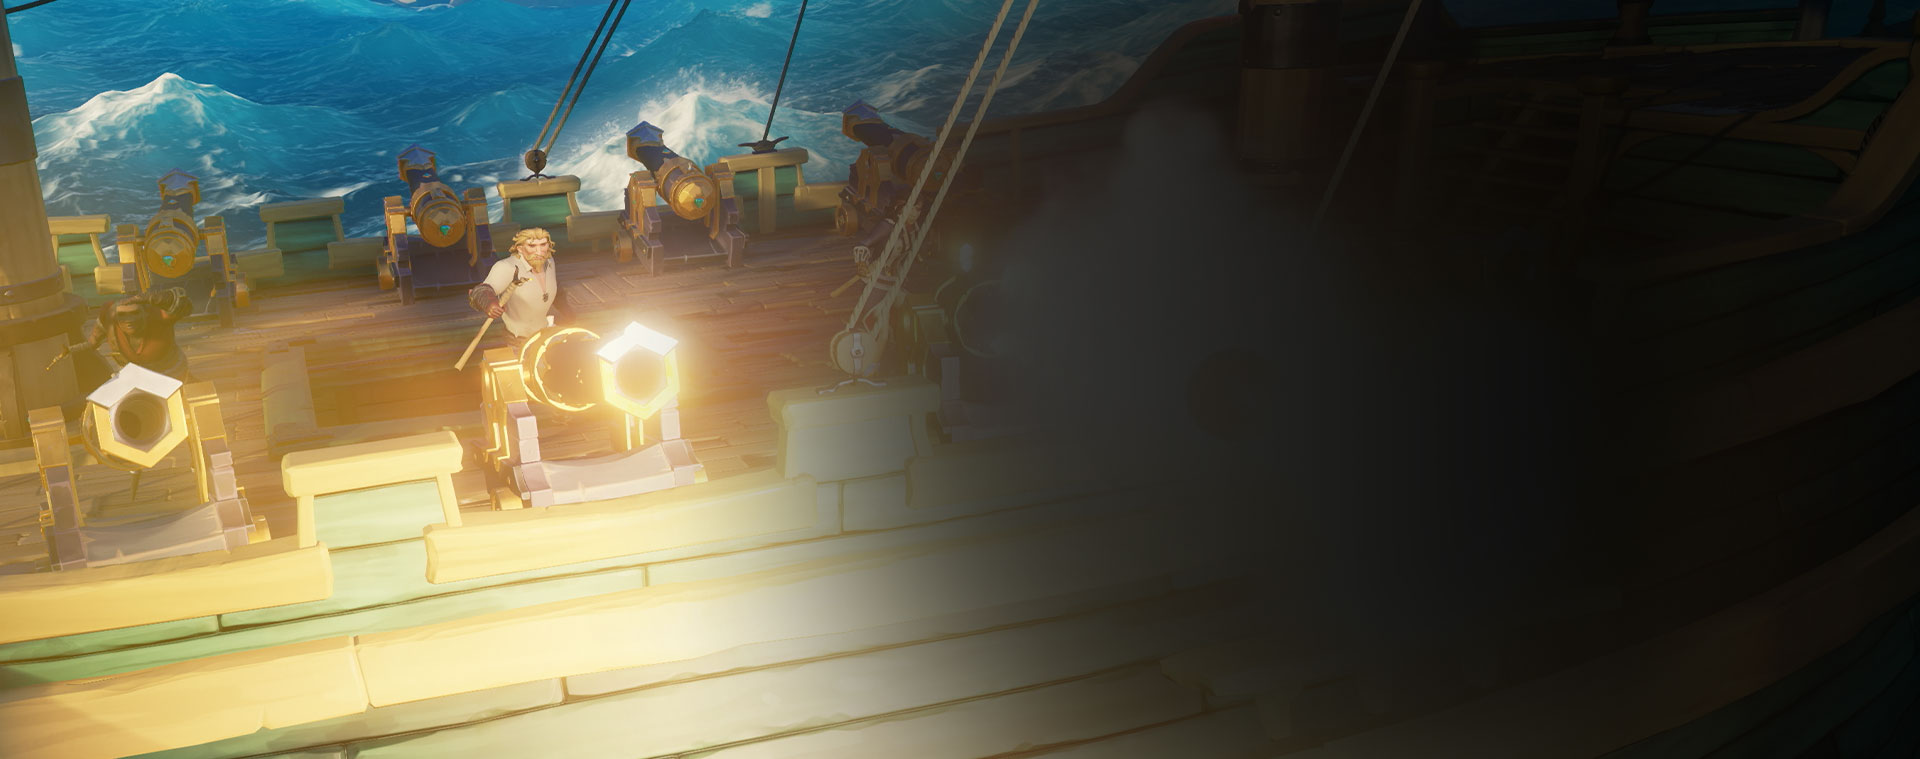 Characters from Sea of Thieves shooting cannons from a ship